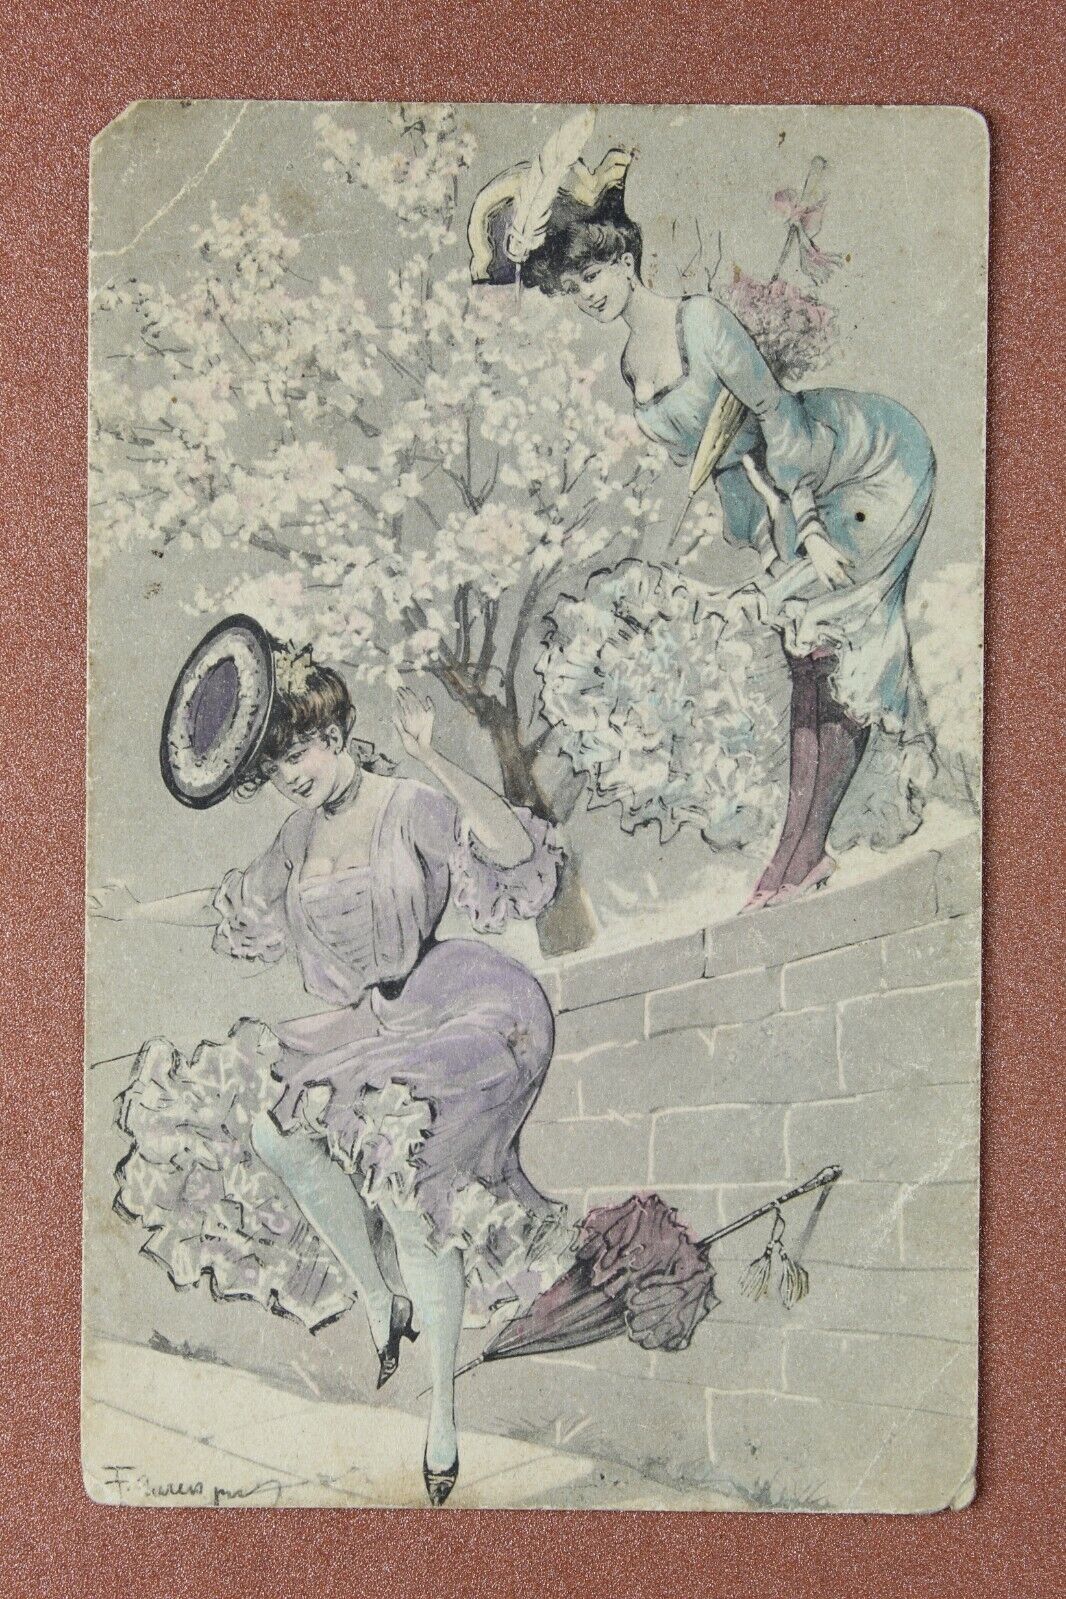 Glamor fashion woman Piquant jump from fence. Antique Verlag SECT postcard 1916s